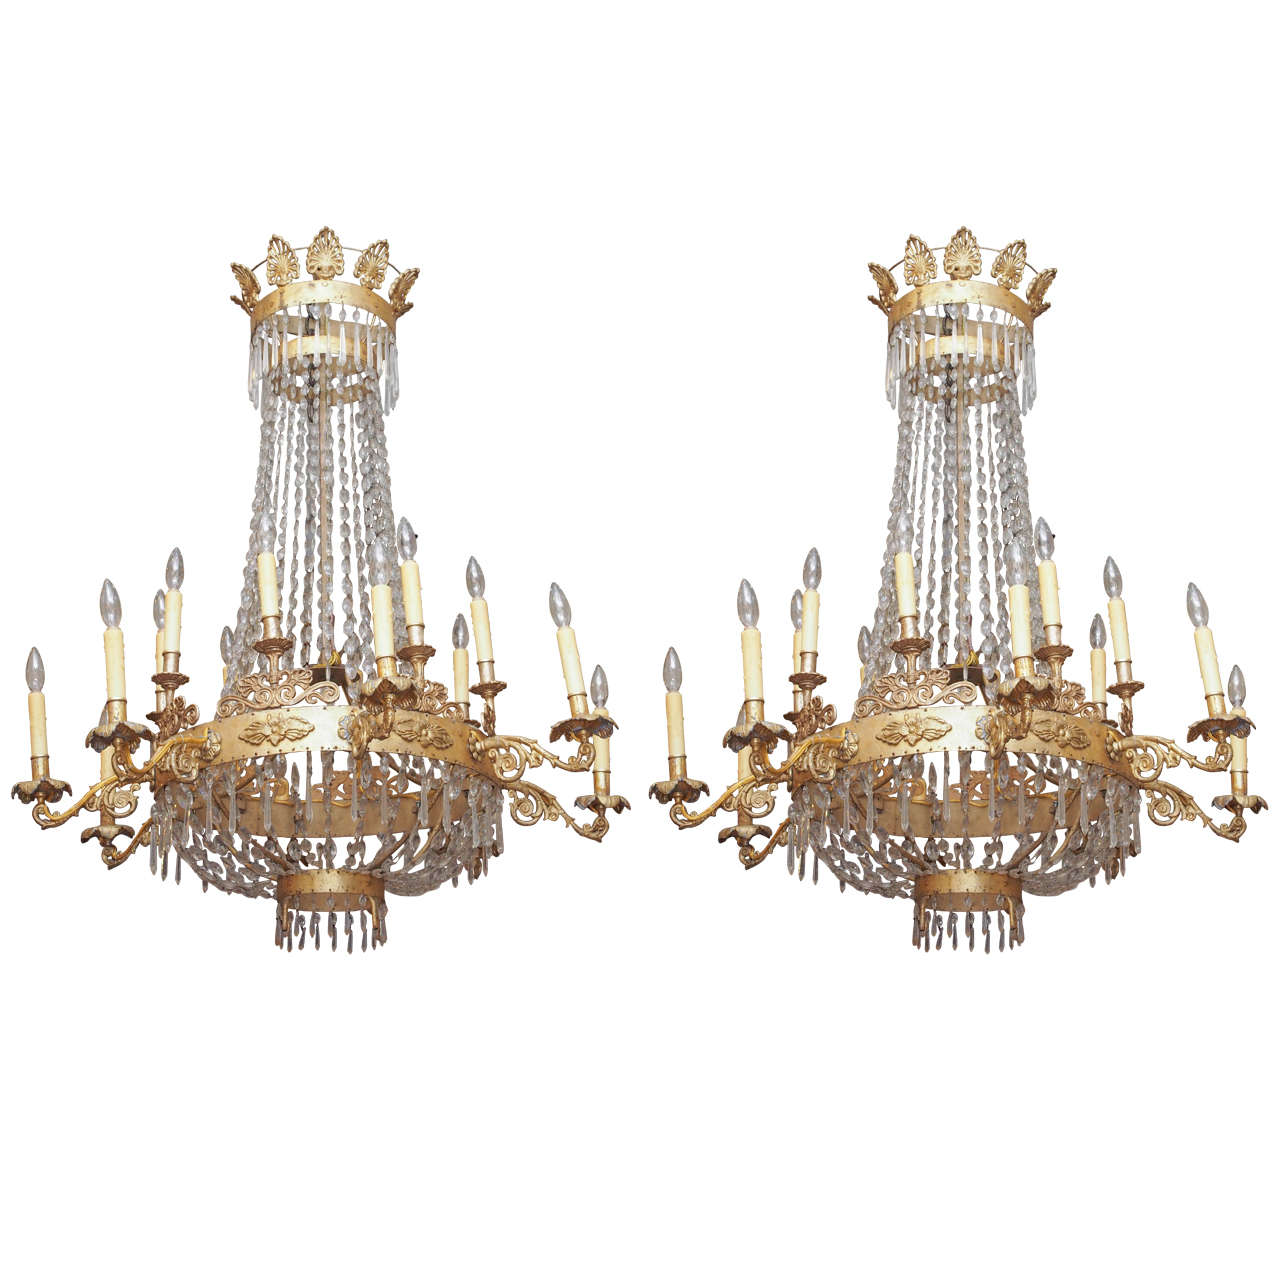 Pair of Italian Empire Gilt Iron and Crystal Chandelier